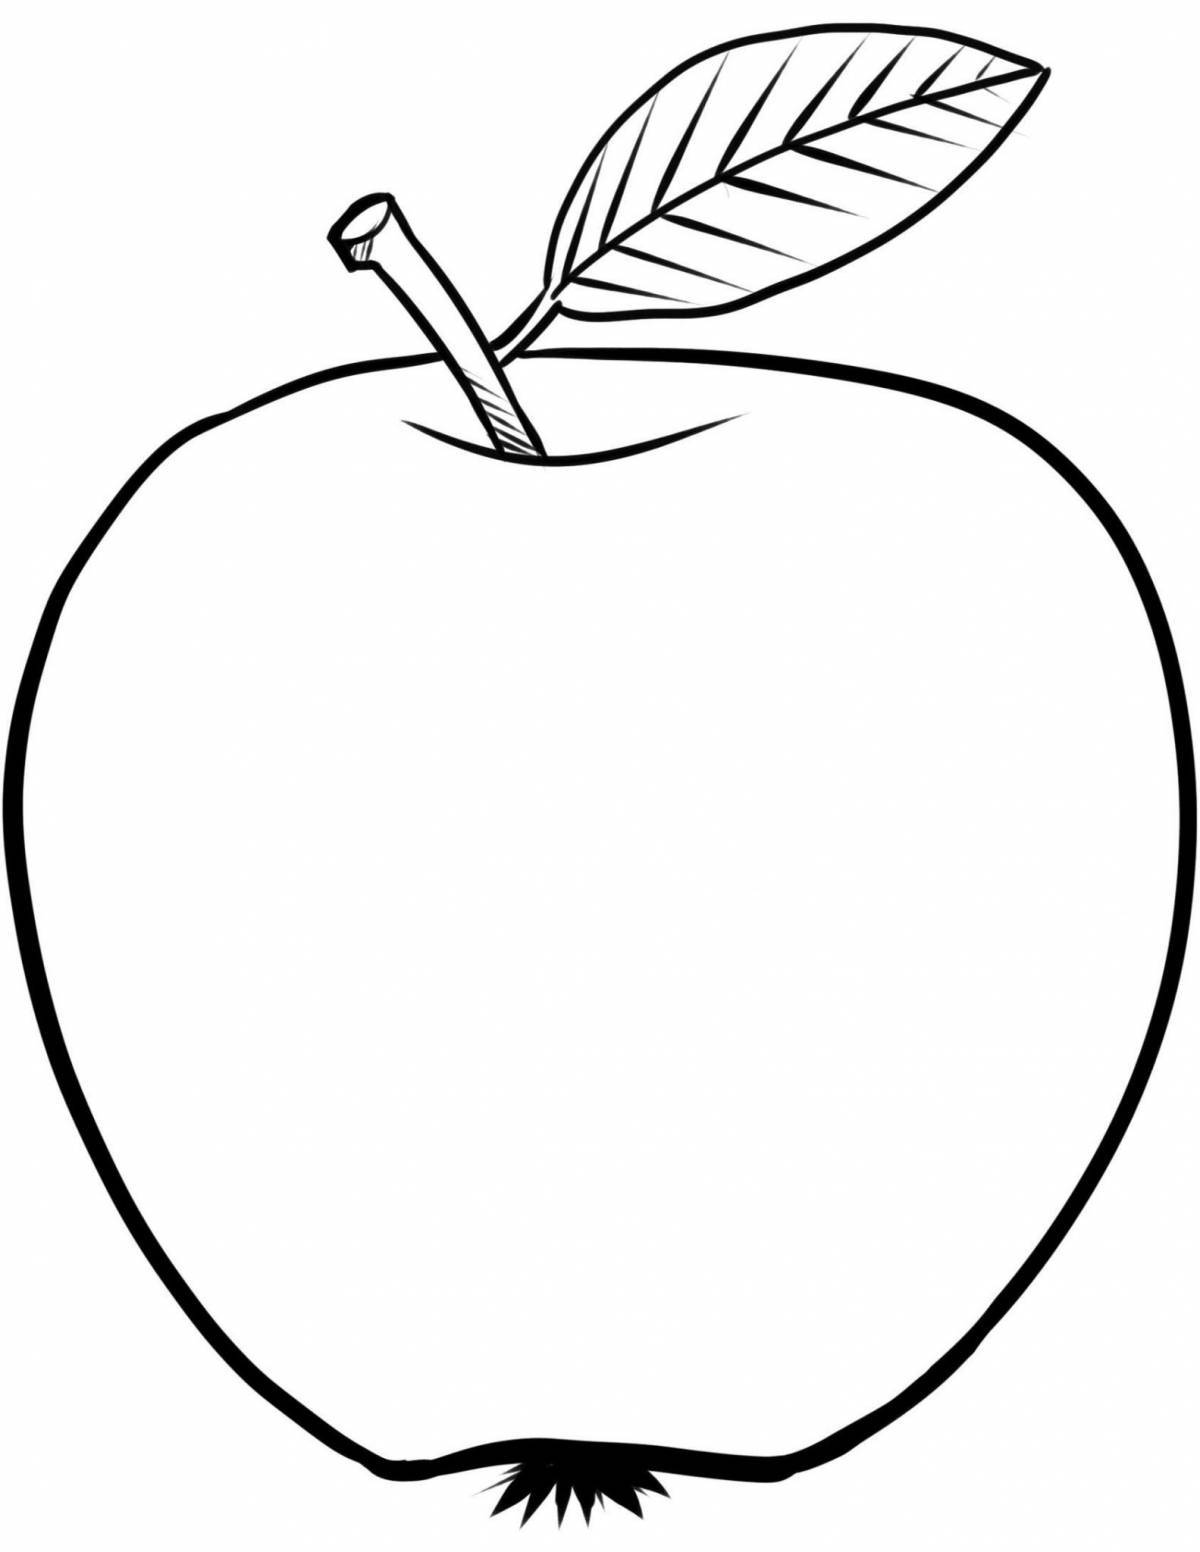 Coloring book happy apple for kids